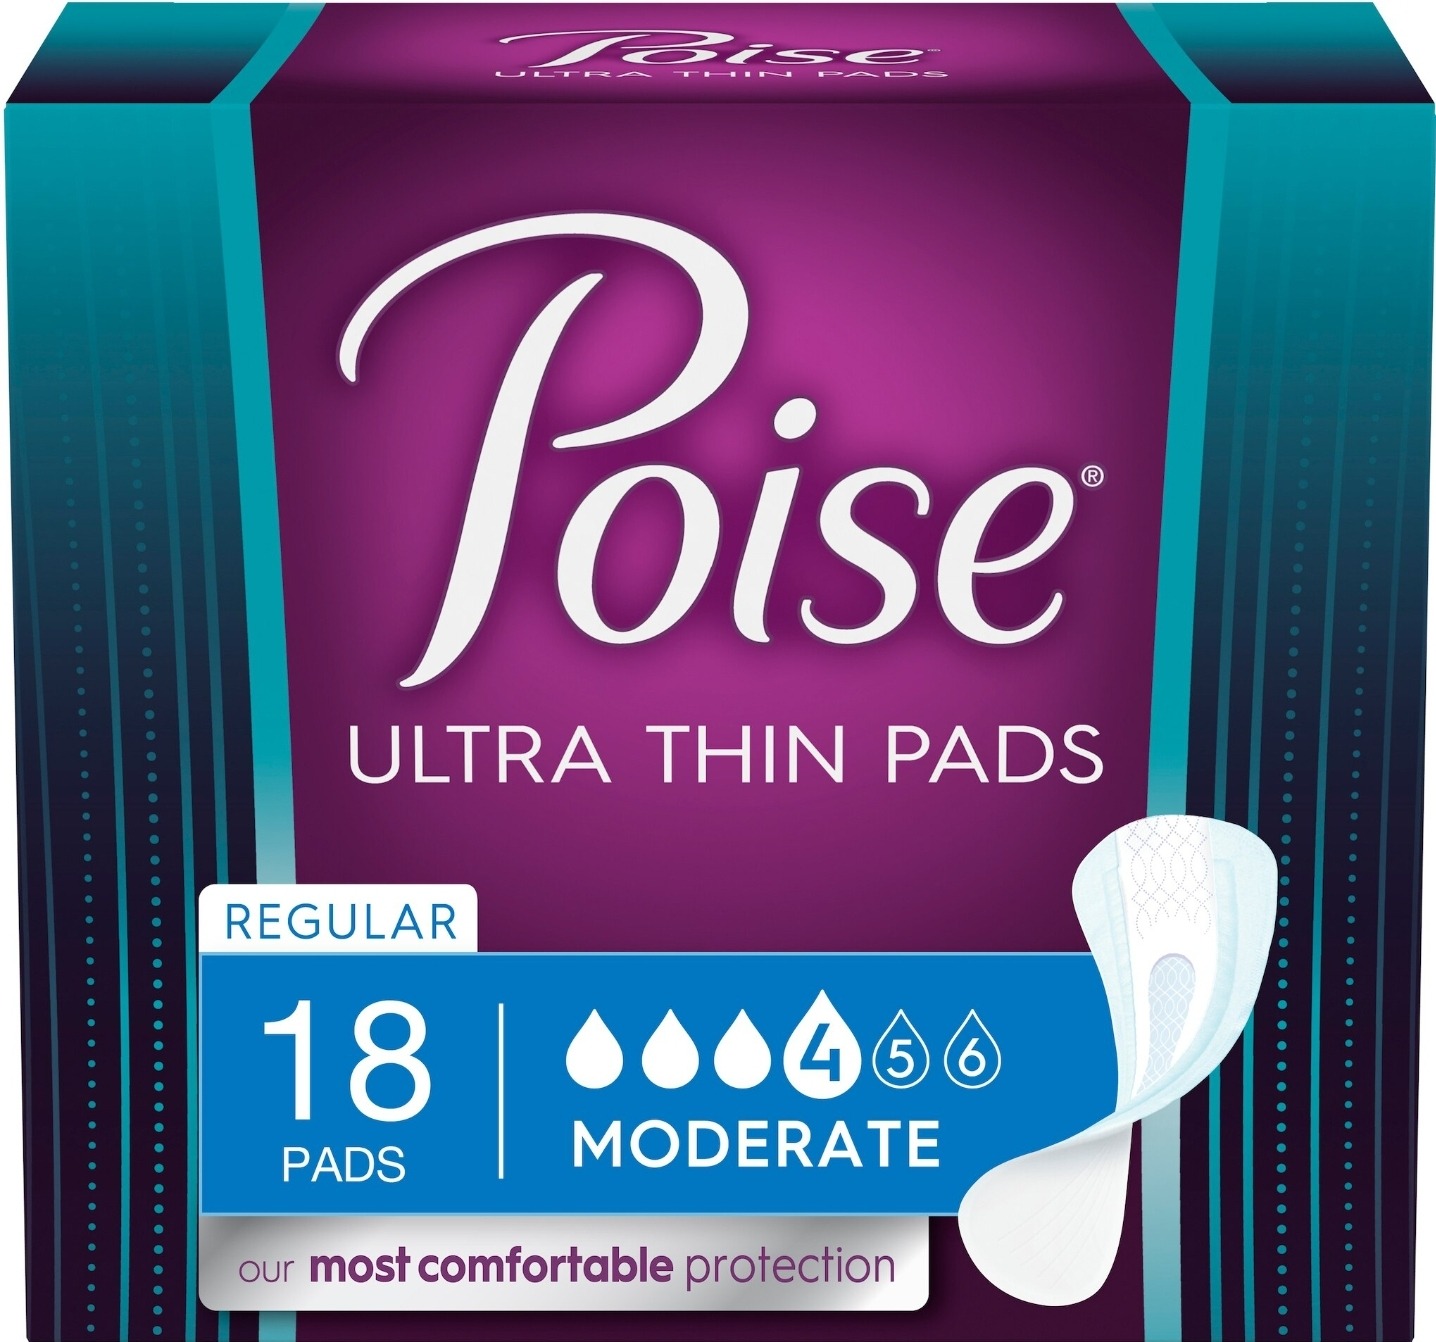 Last day to get your Free Poise Ultra Thin Pads from CVS